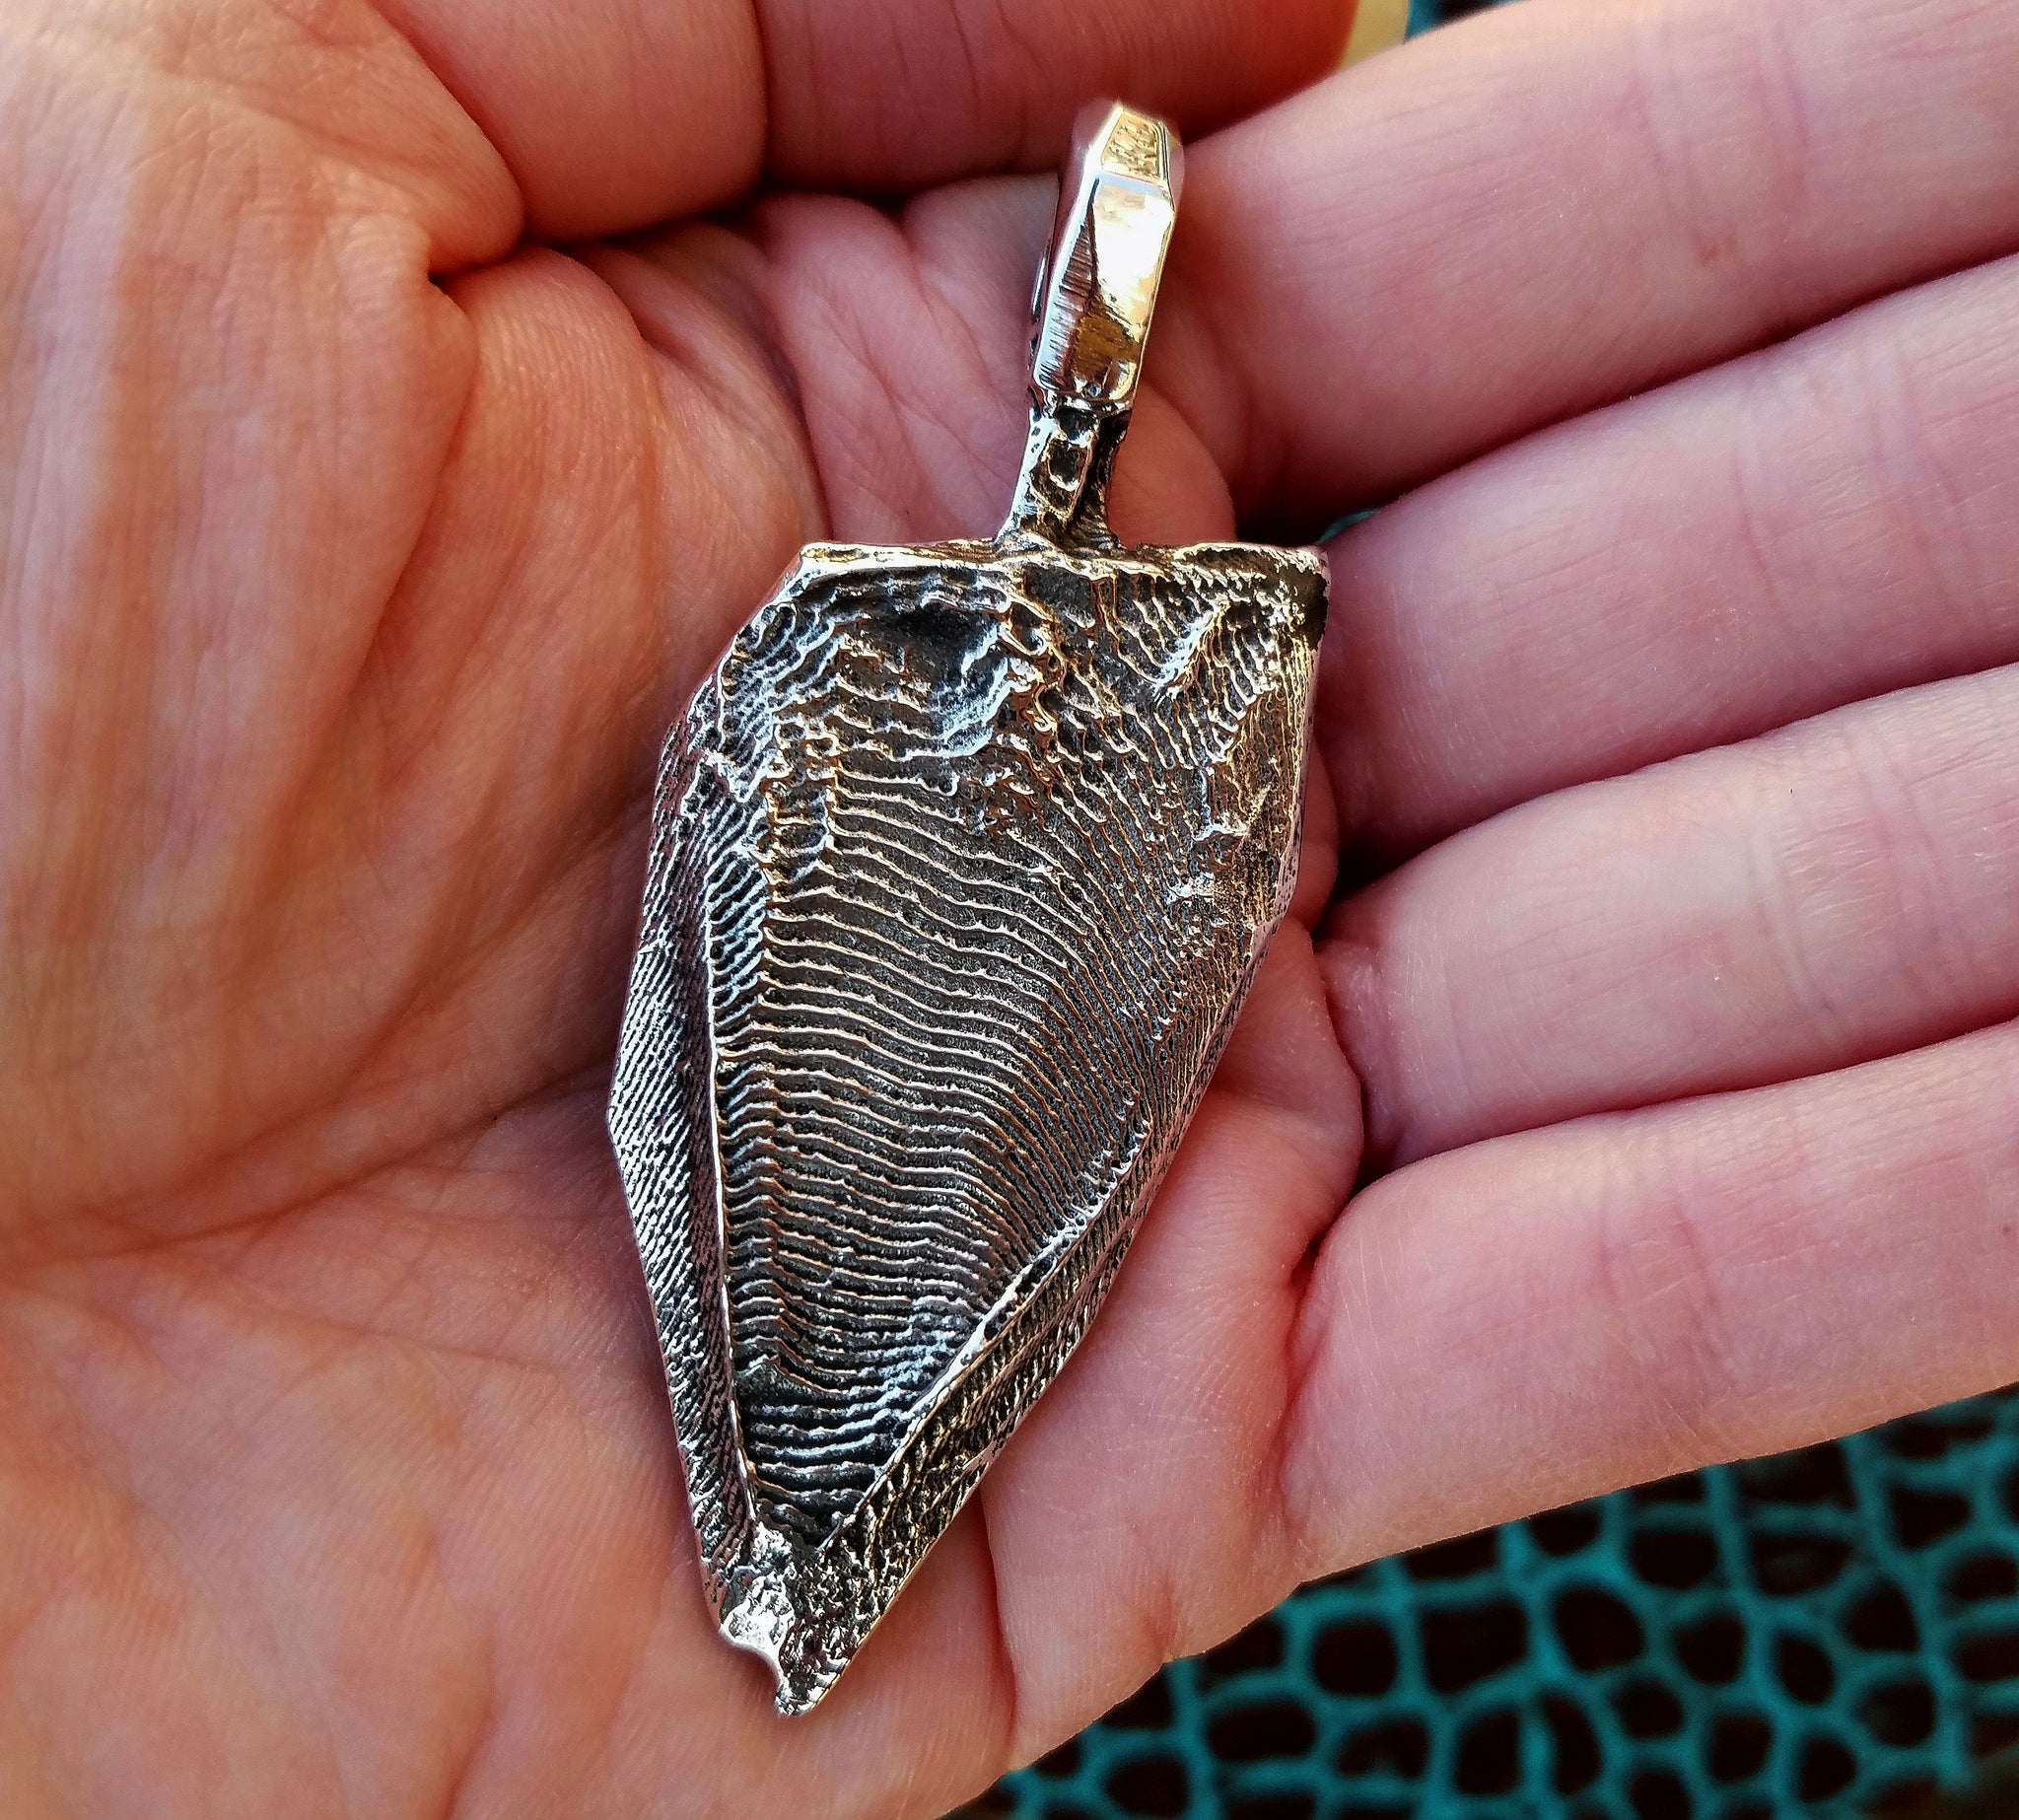 'Alien Artifact' Hand-carved Hand-poured Cuttlefish Cast Pendant #6 by Phantom